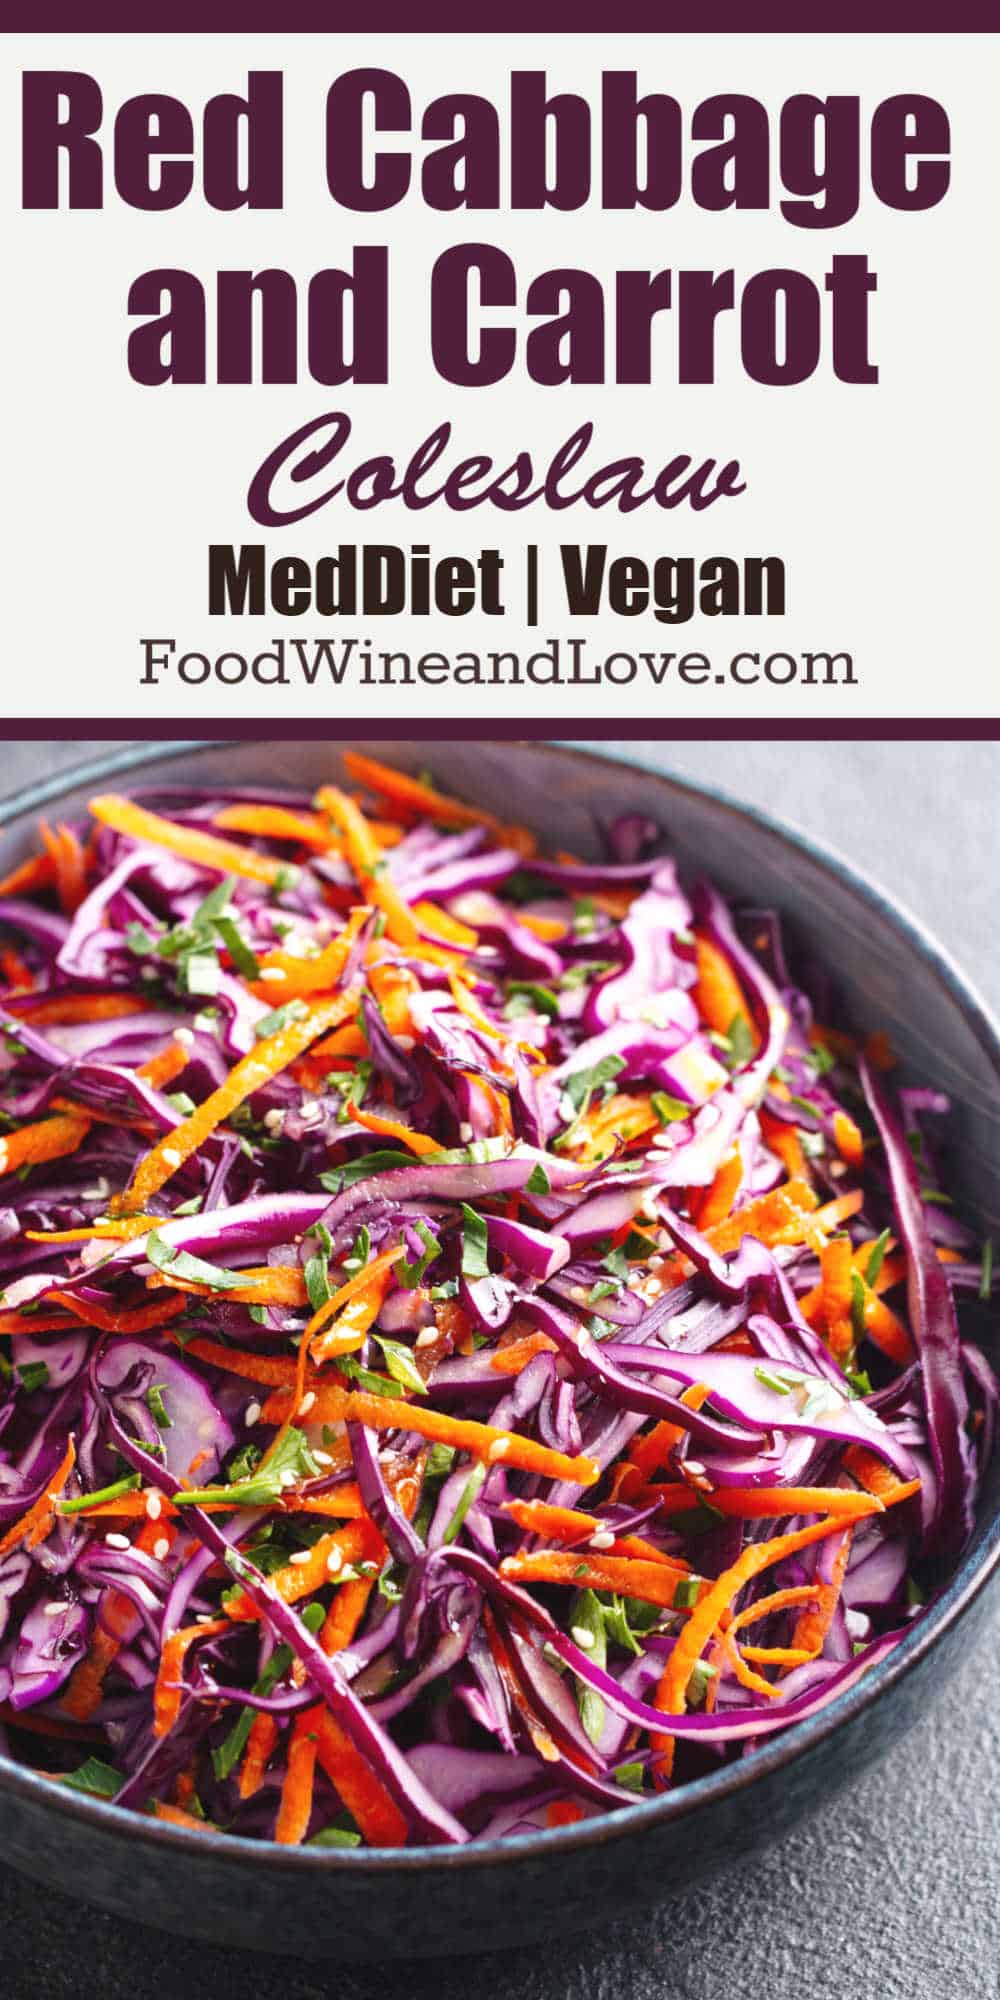 Red Cabbage and Carrot Cole Slaw